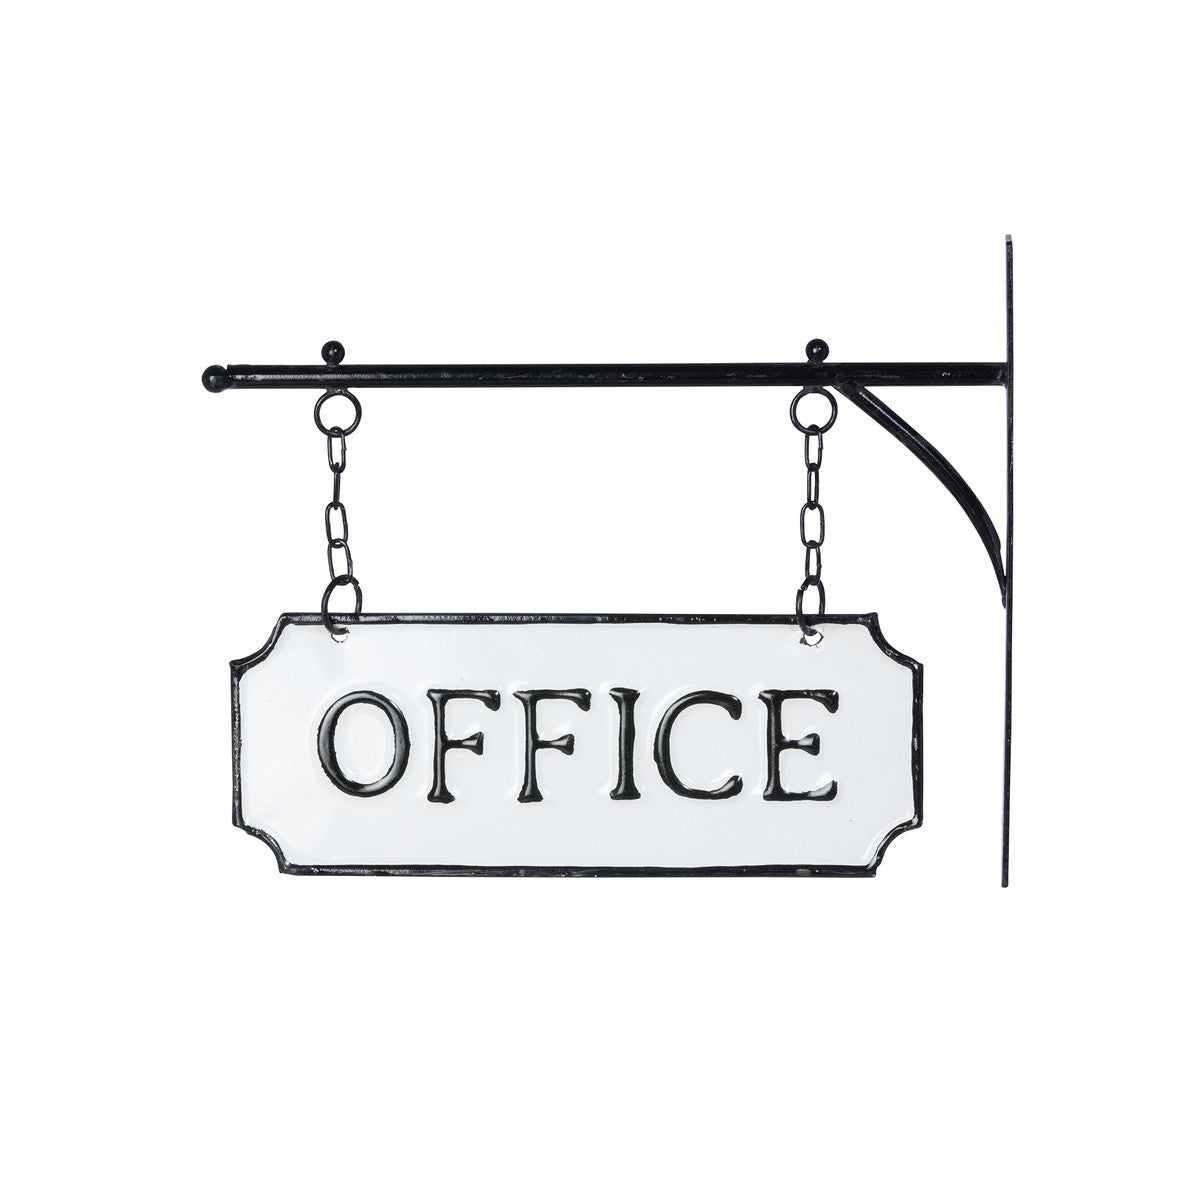 Park Hill Collection Park Hill Cafe Metal Office Sign With Hanging Display Bar